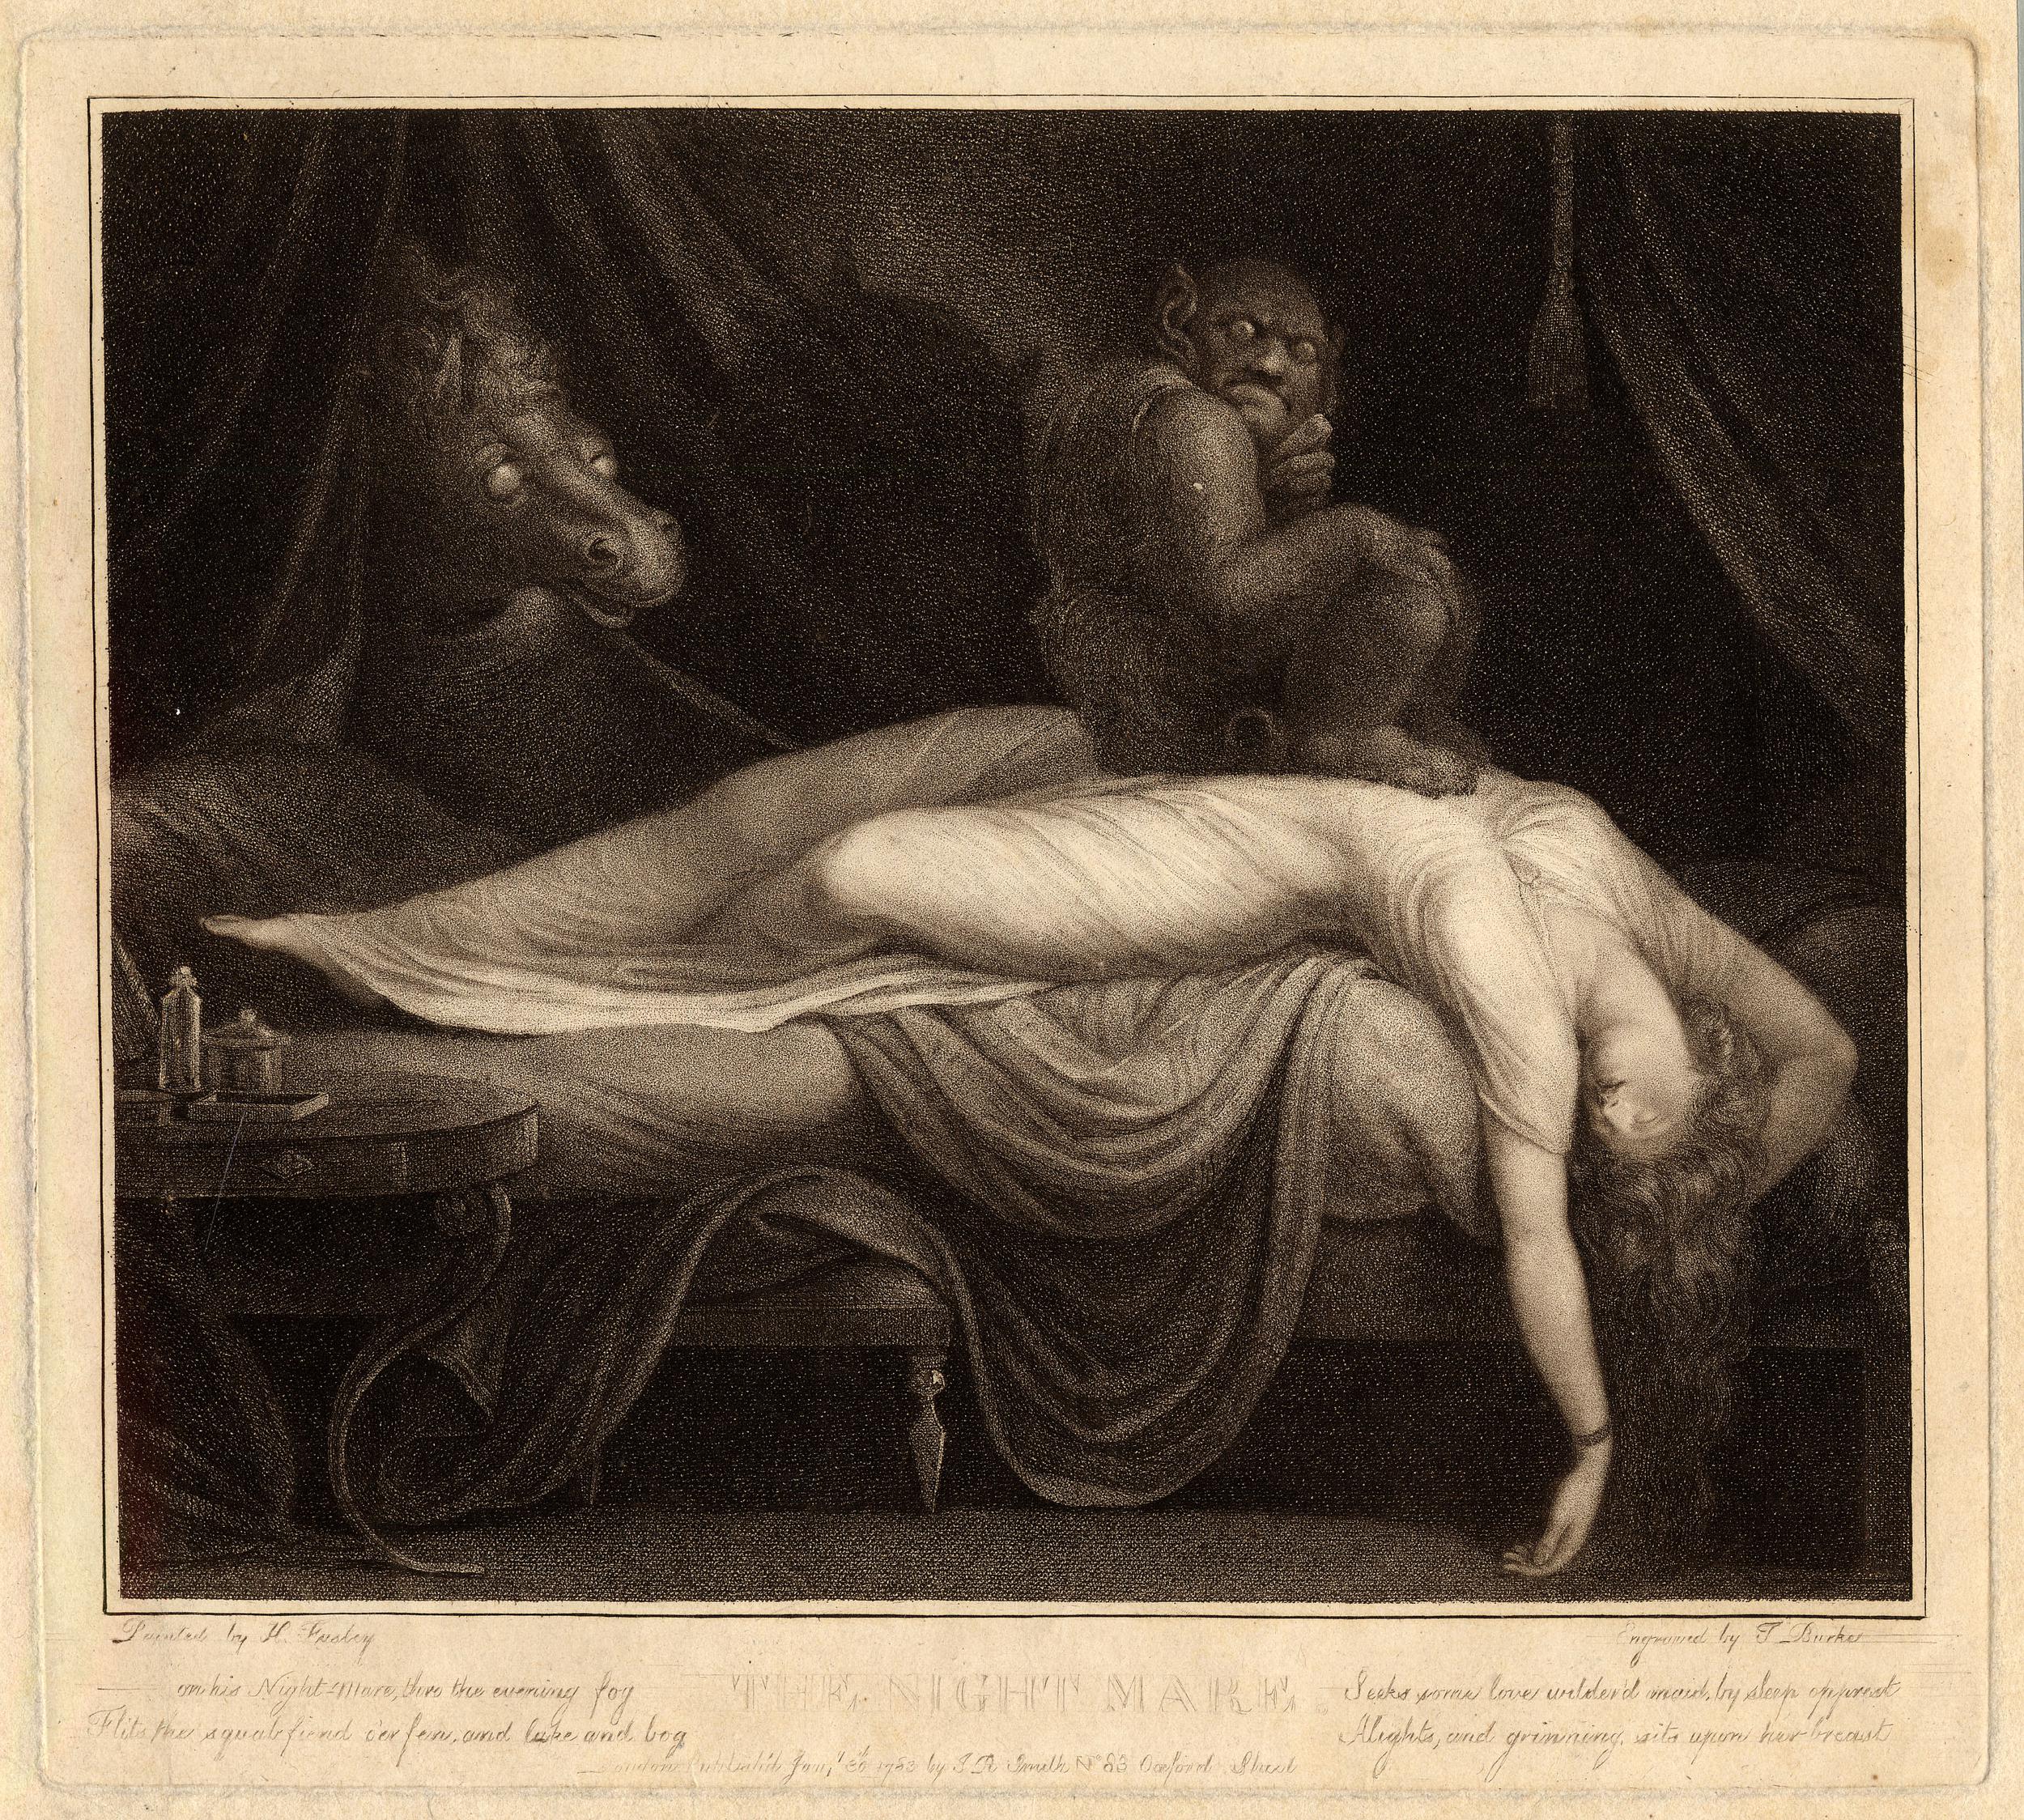 Thomas Burke, The nightmare after Fuseli, published in London by R. J. Smith, 1783, stipple engraving in sepia; plate mark 227 x 250 mm (British Museum)